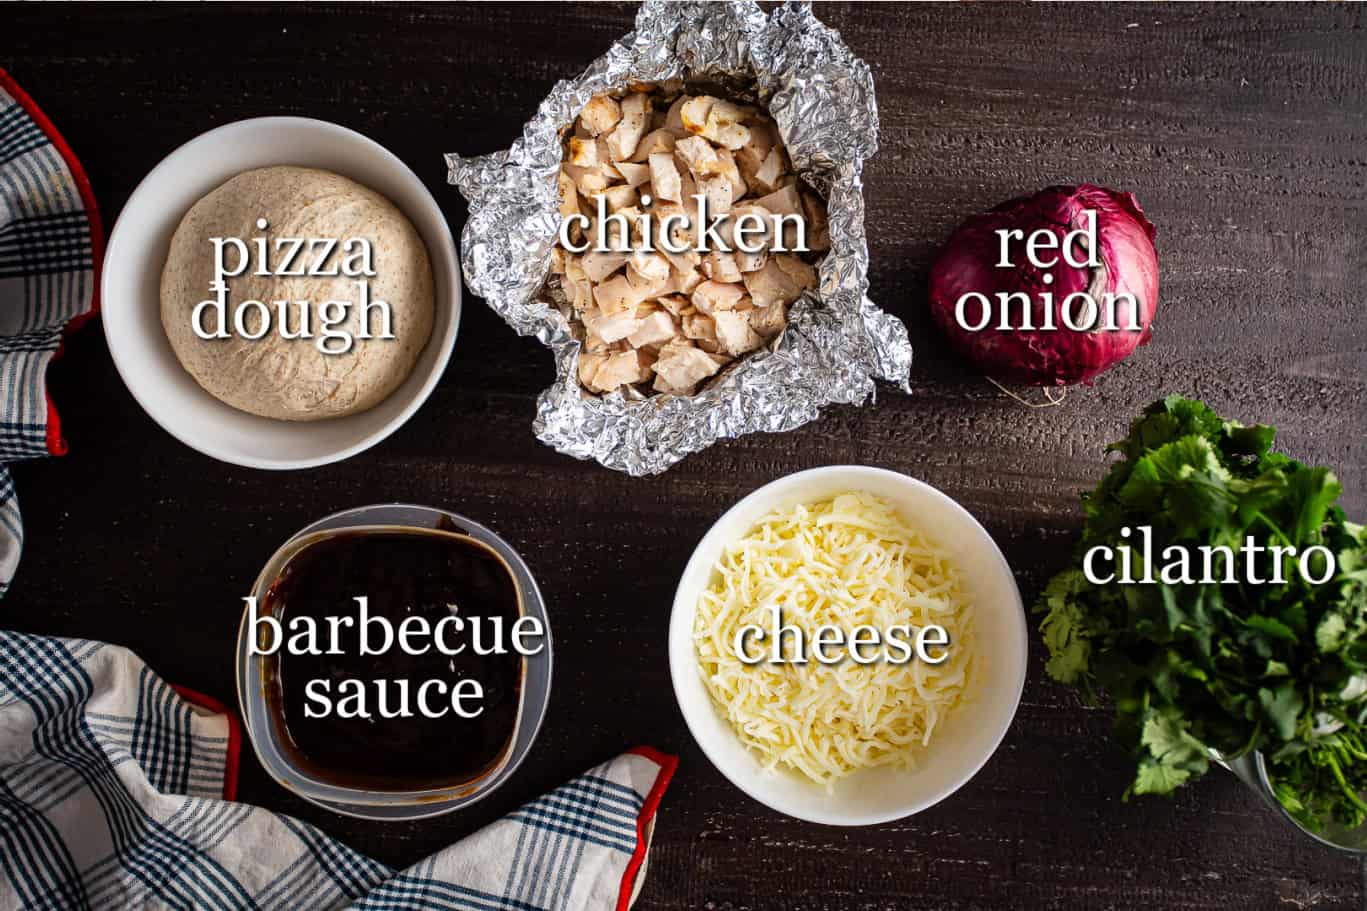 Ingredients for making barbecue chicken pizza, with text labels.